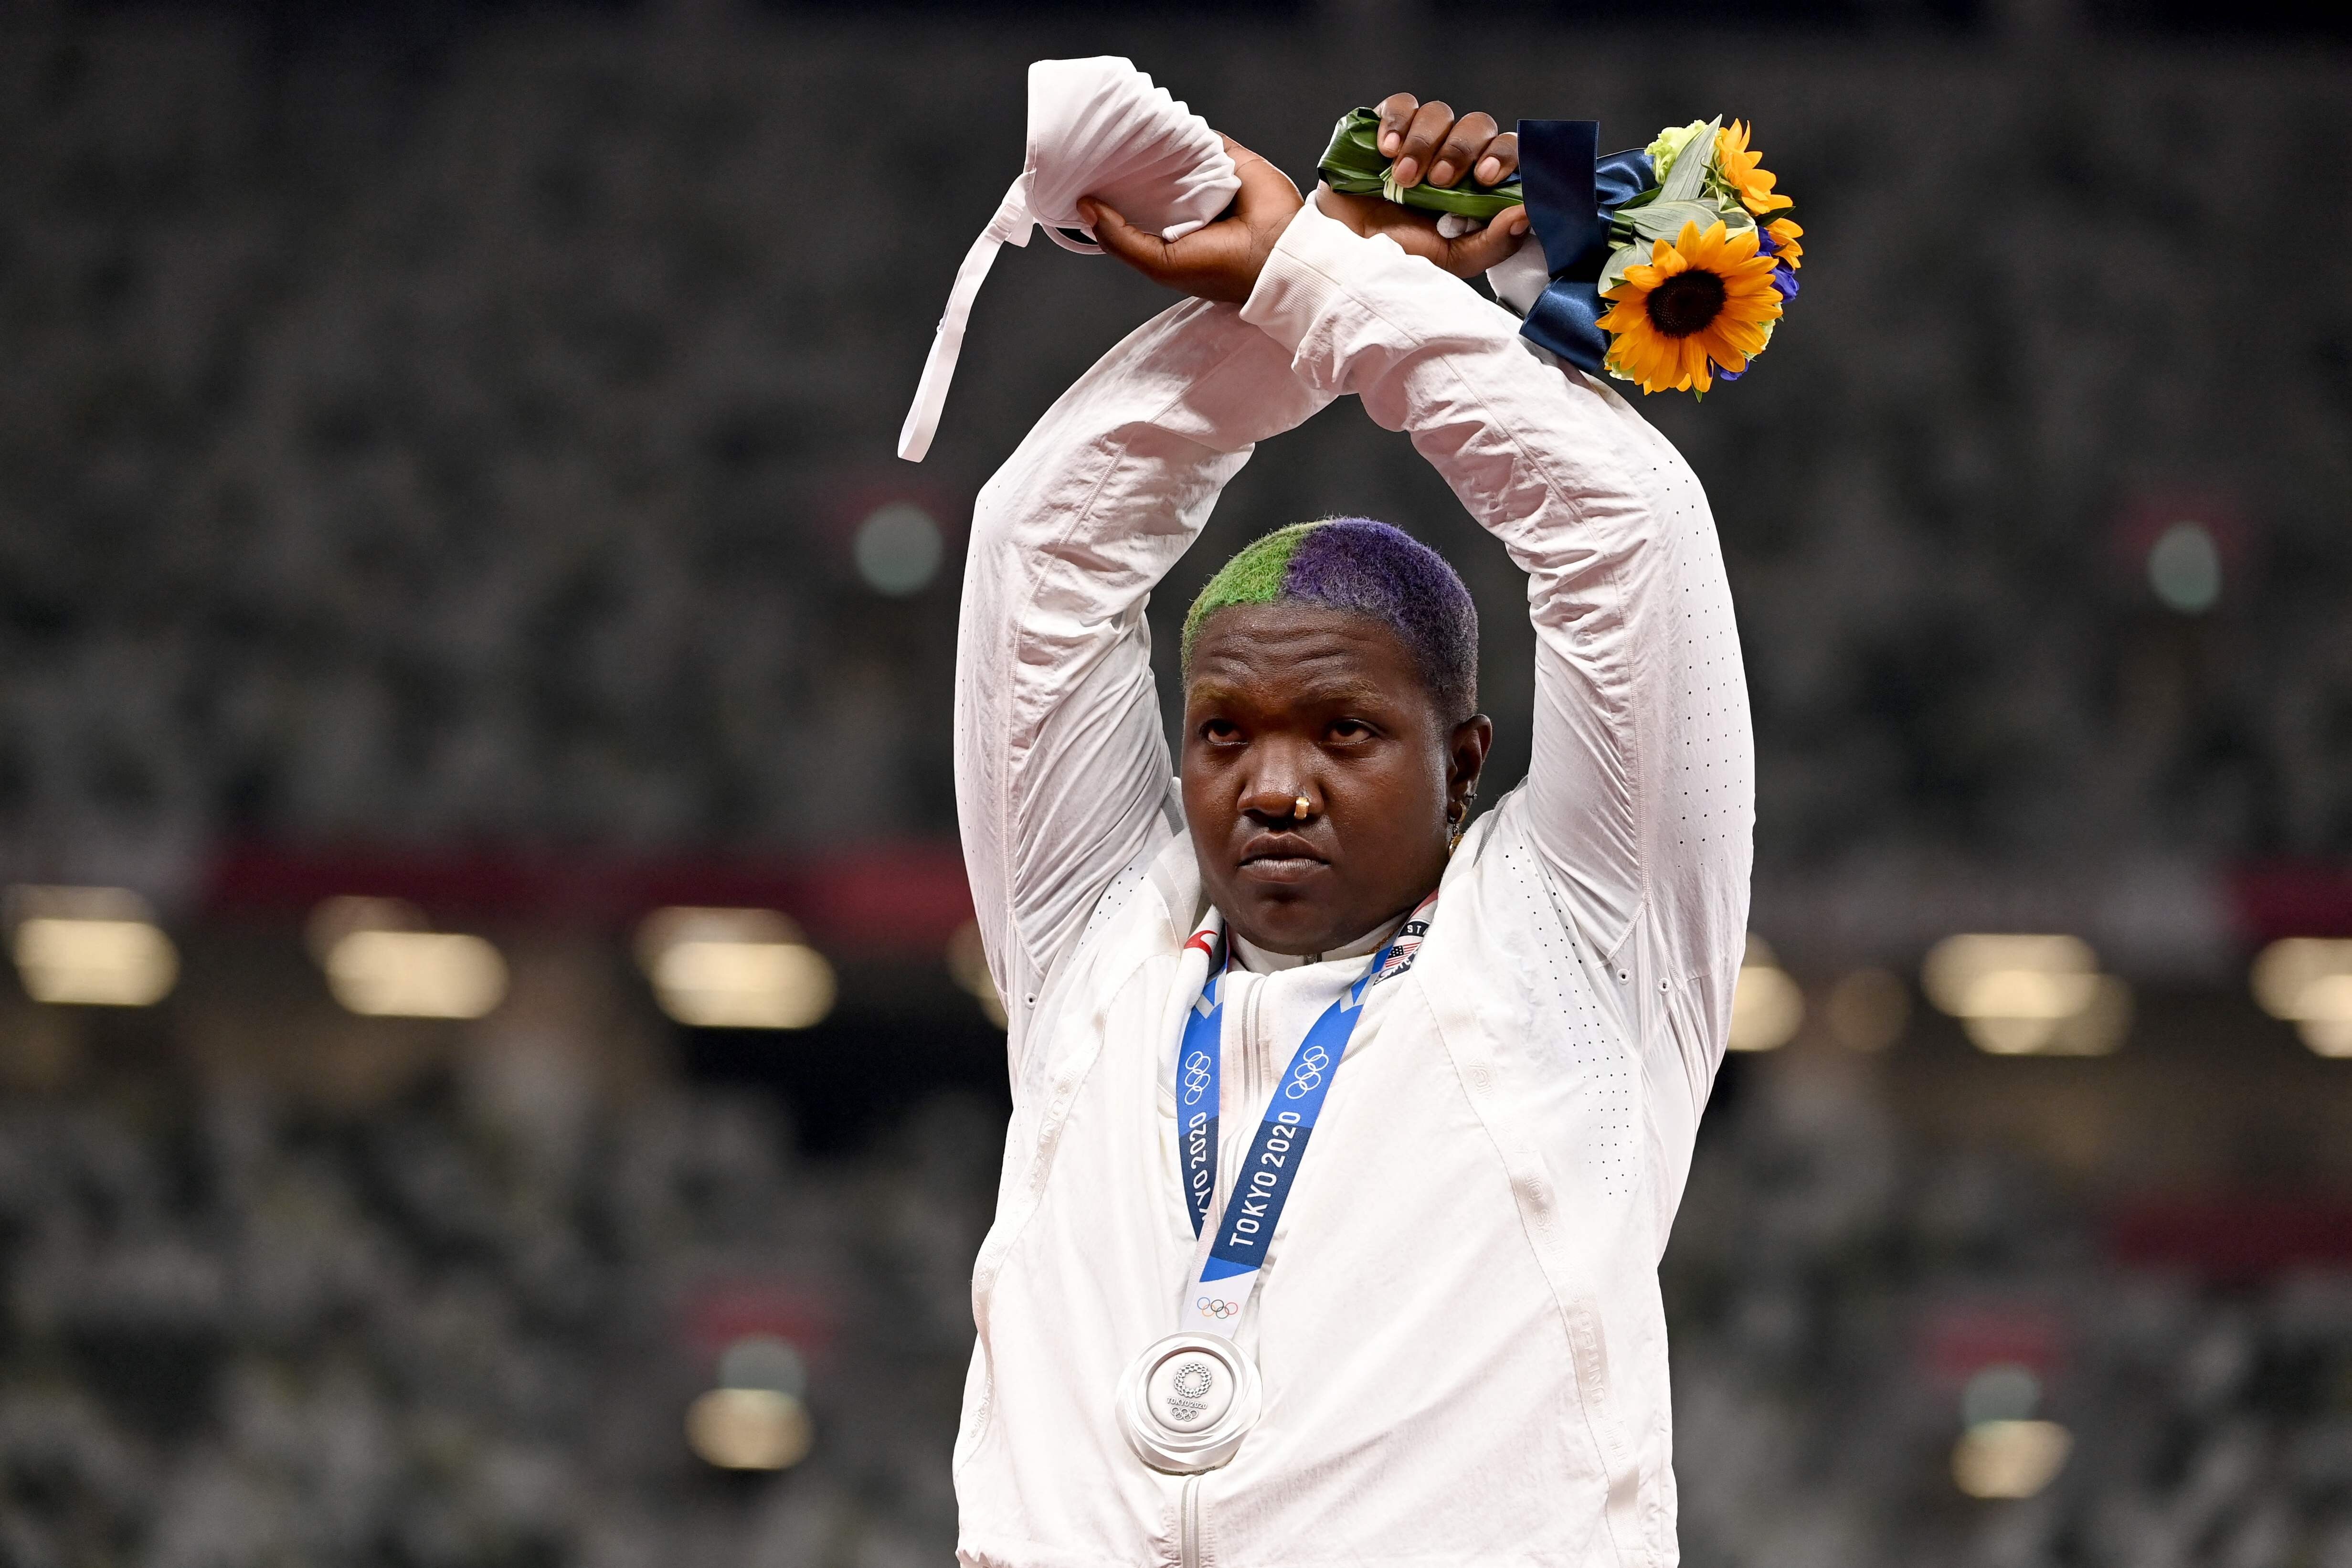 American silver medallist Raven Saunders makes an X sign with her arms while on the podium. Photo: AFP